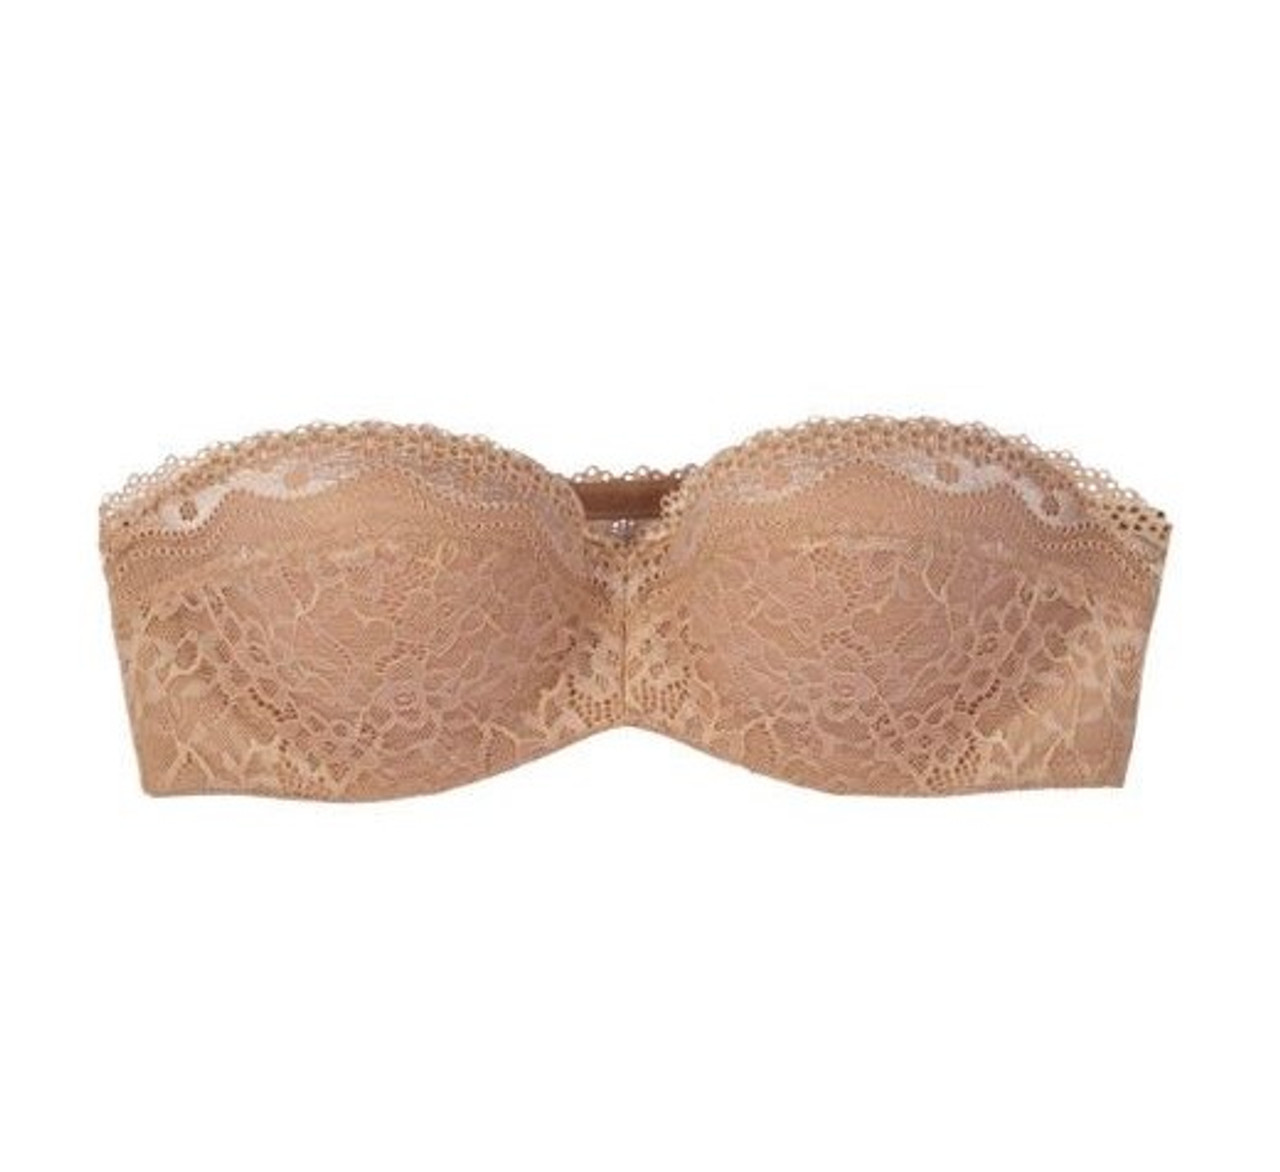 B.tempt'd B.enticing Strapless Bra in Night - Busted Bra Shop